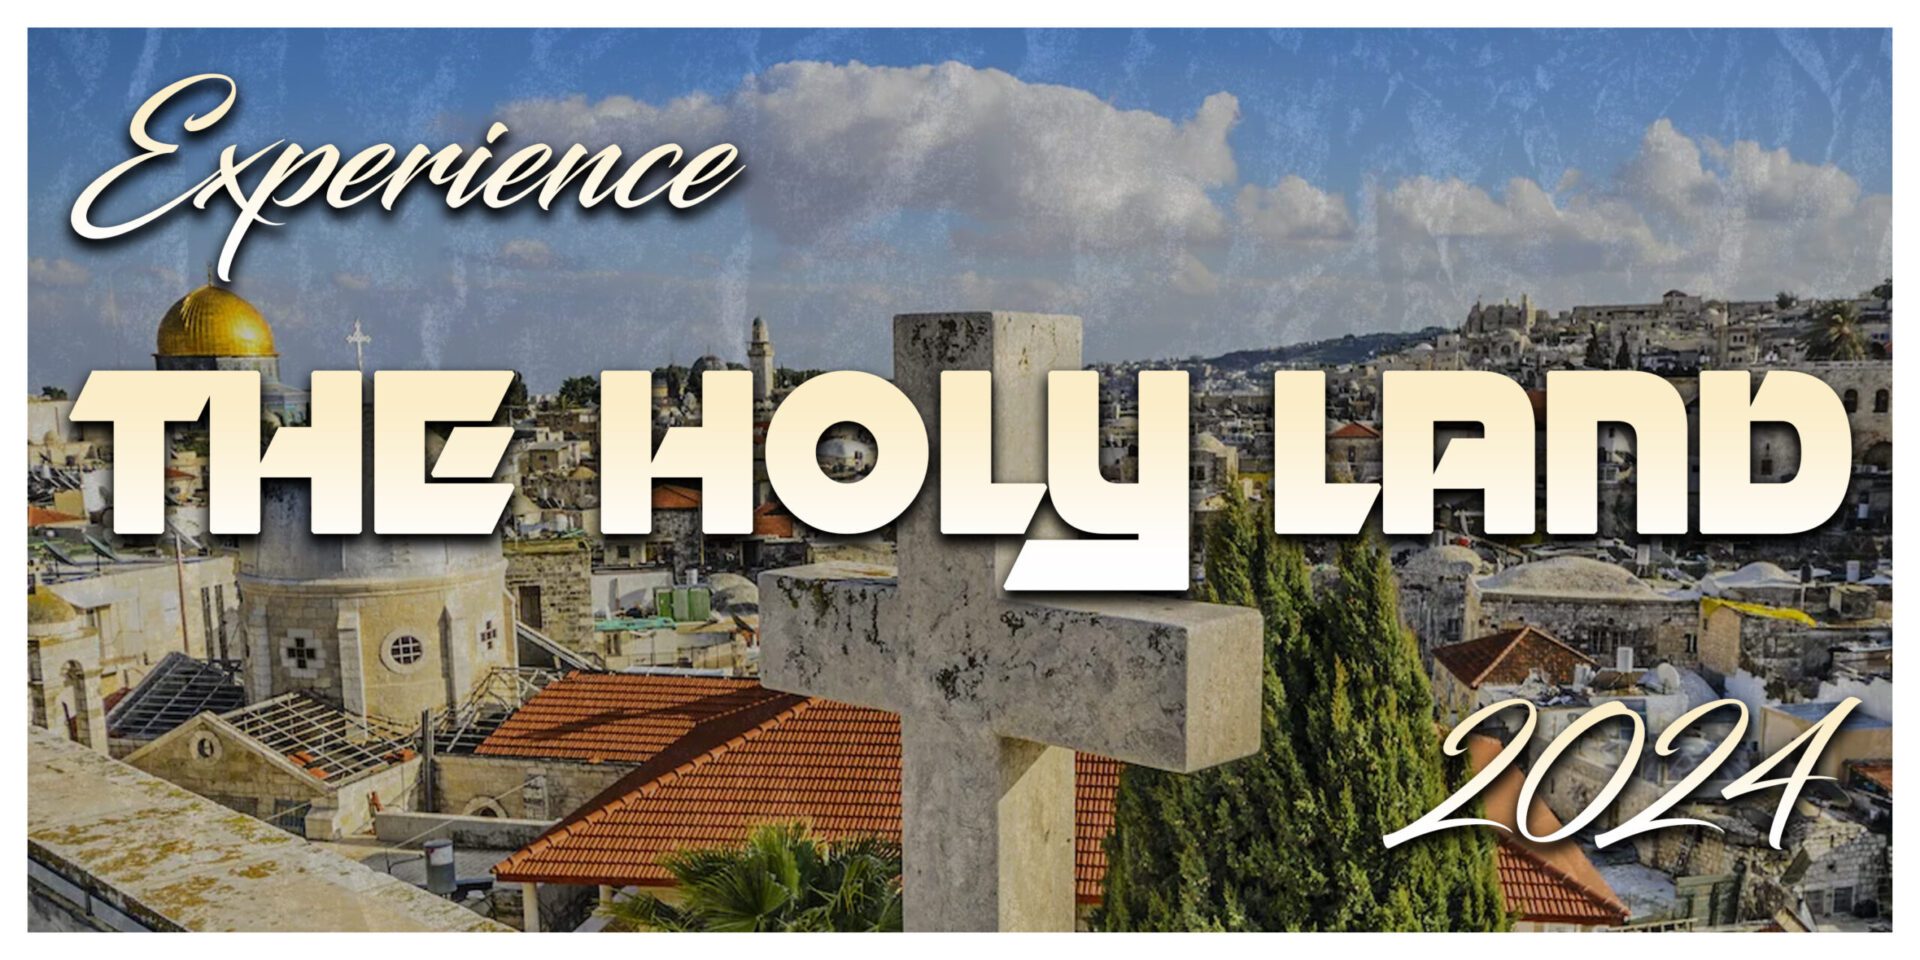 holy land tour march 2024